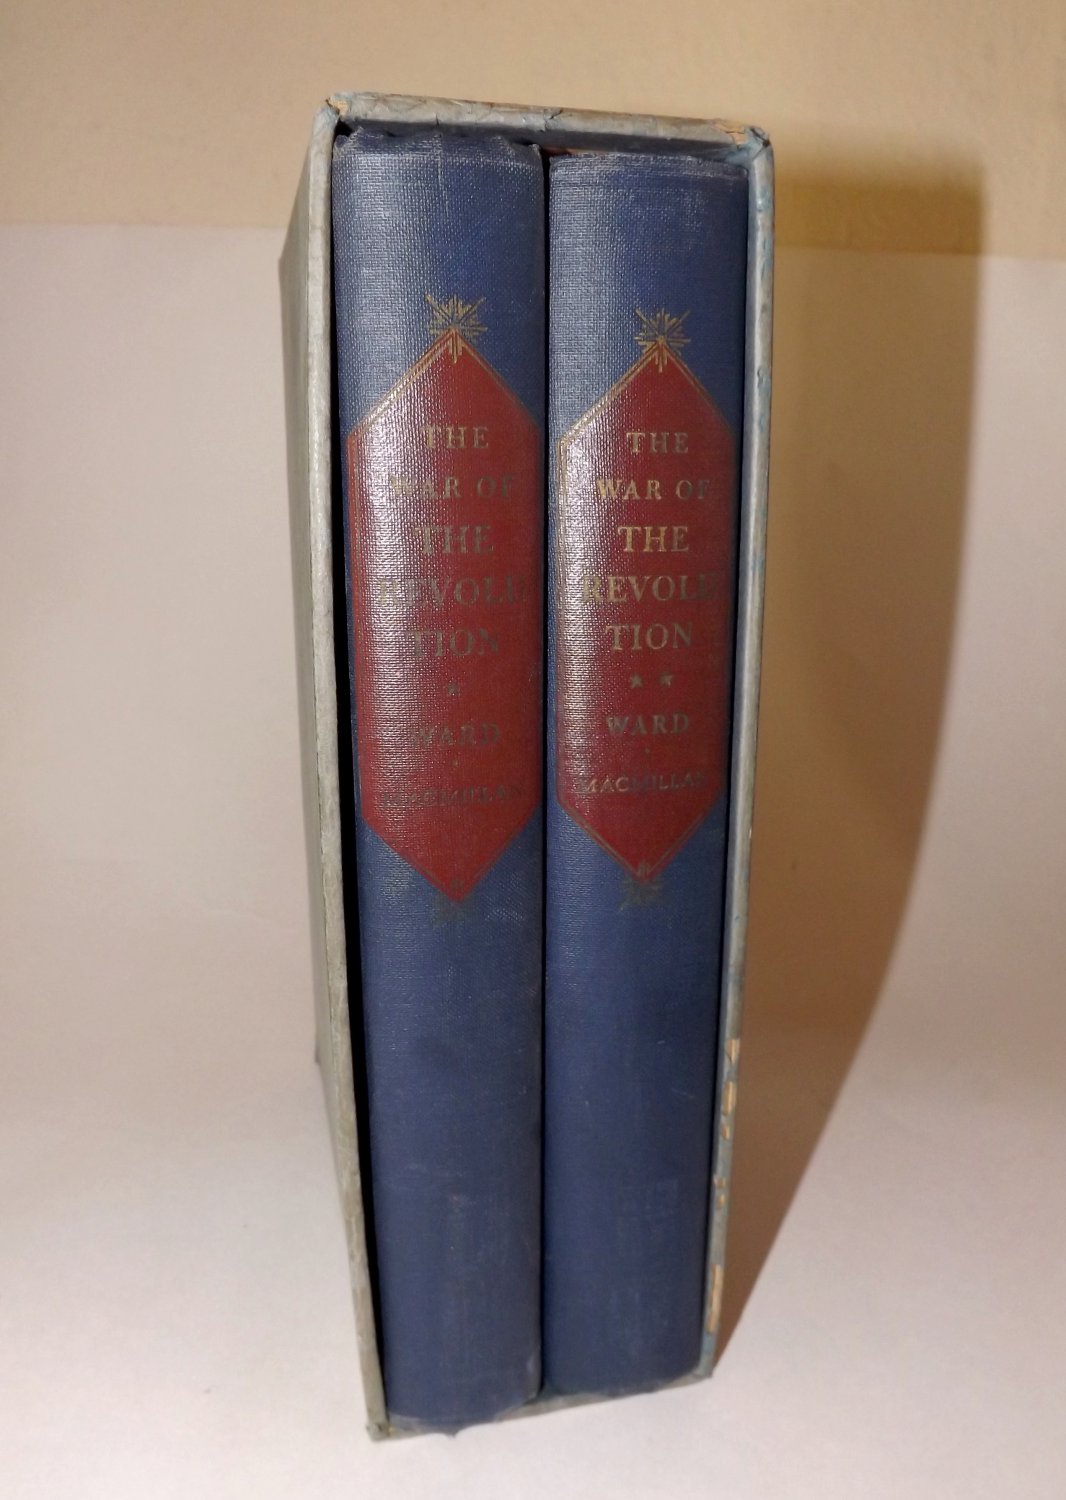 The War of the Revolution, 2 Vols in 1 by Christopher Ward